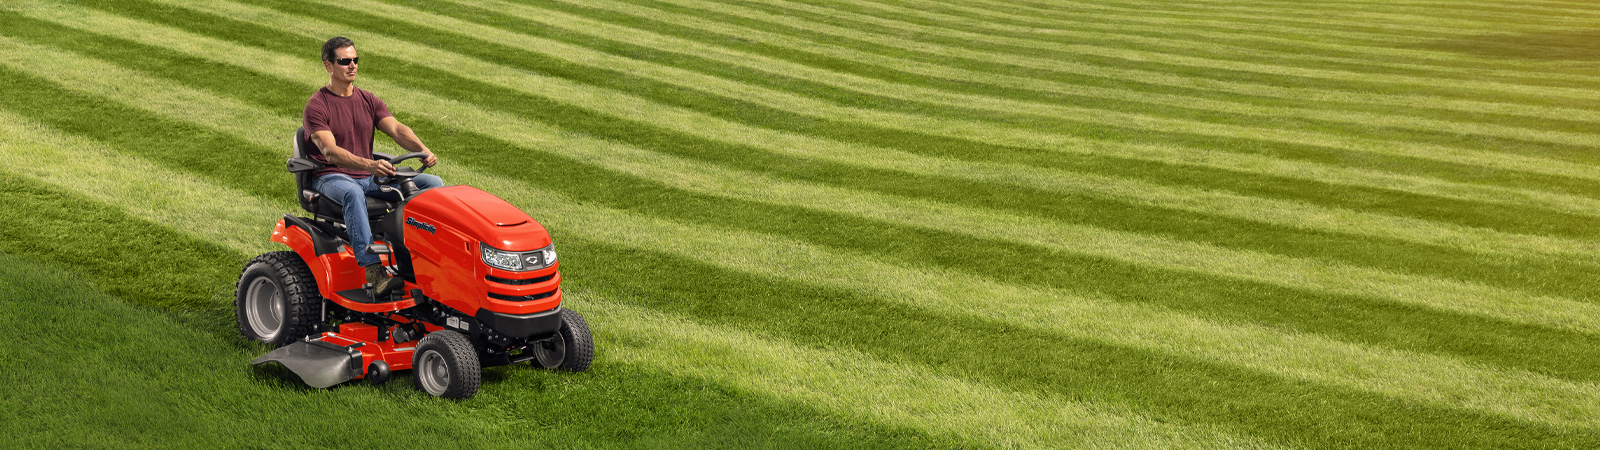 Man riding Simplicity tractor on striped lawn